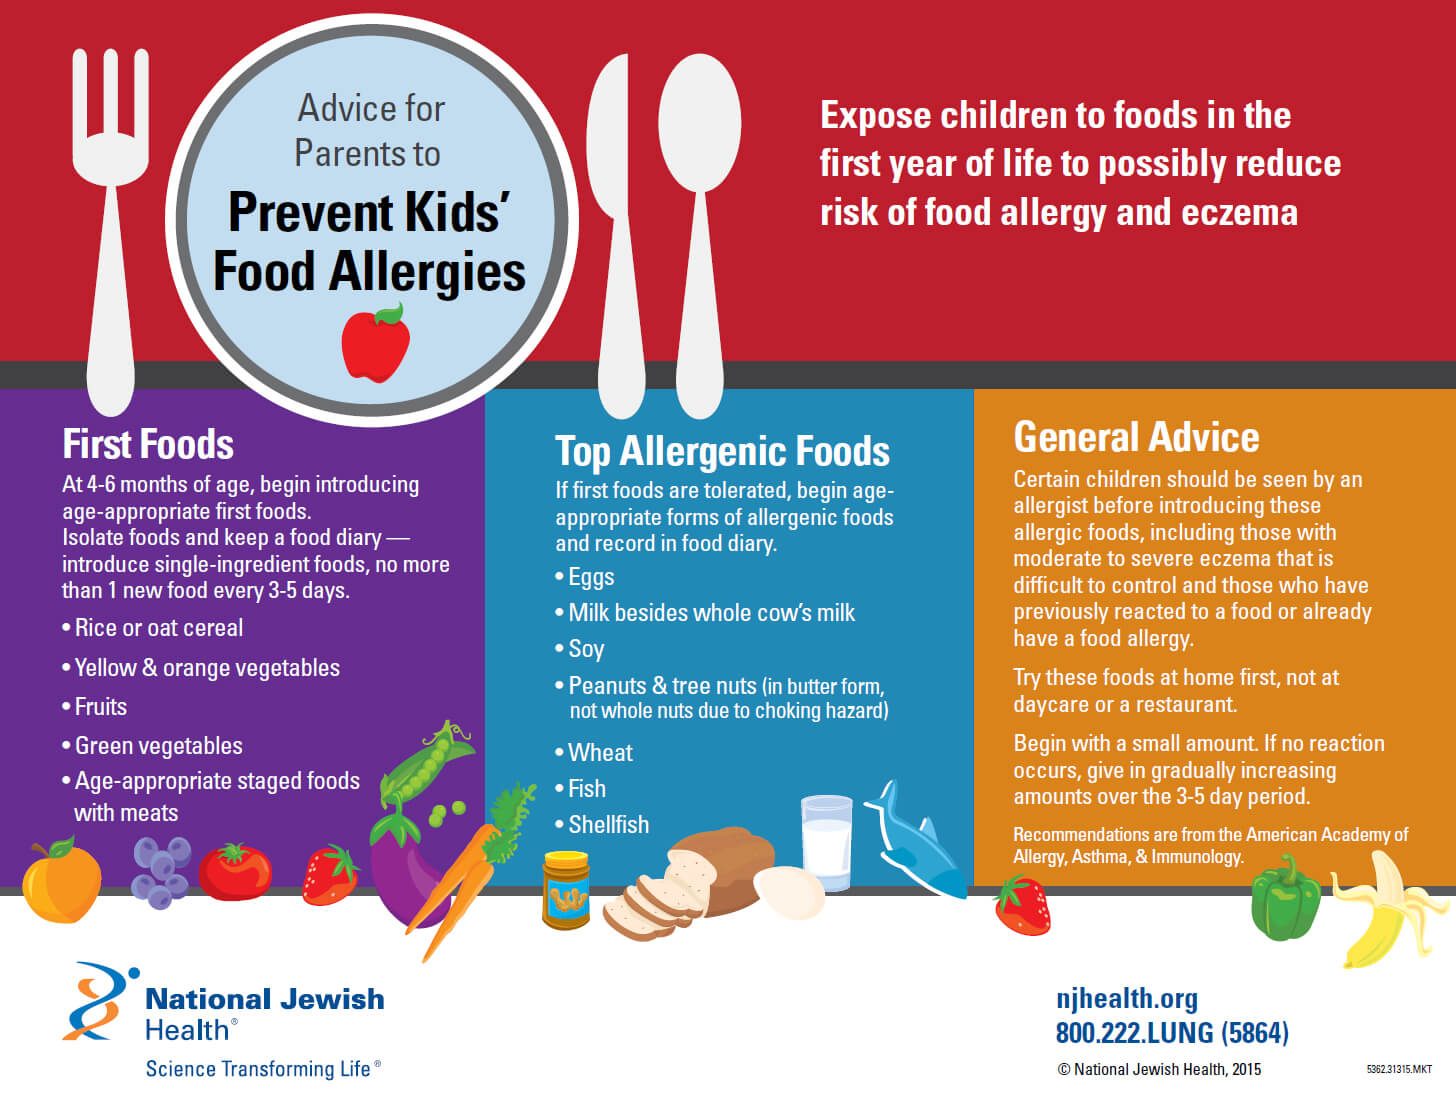 New Advice for Parents to Prevent Kids' Food Allergies